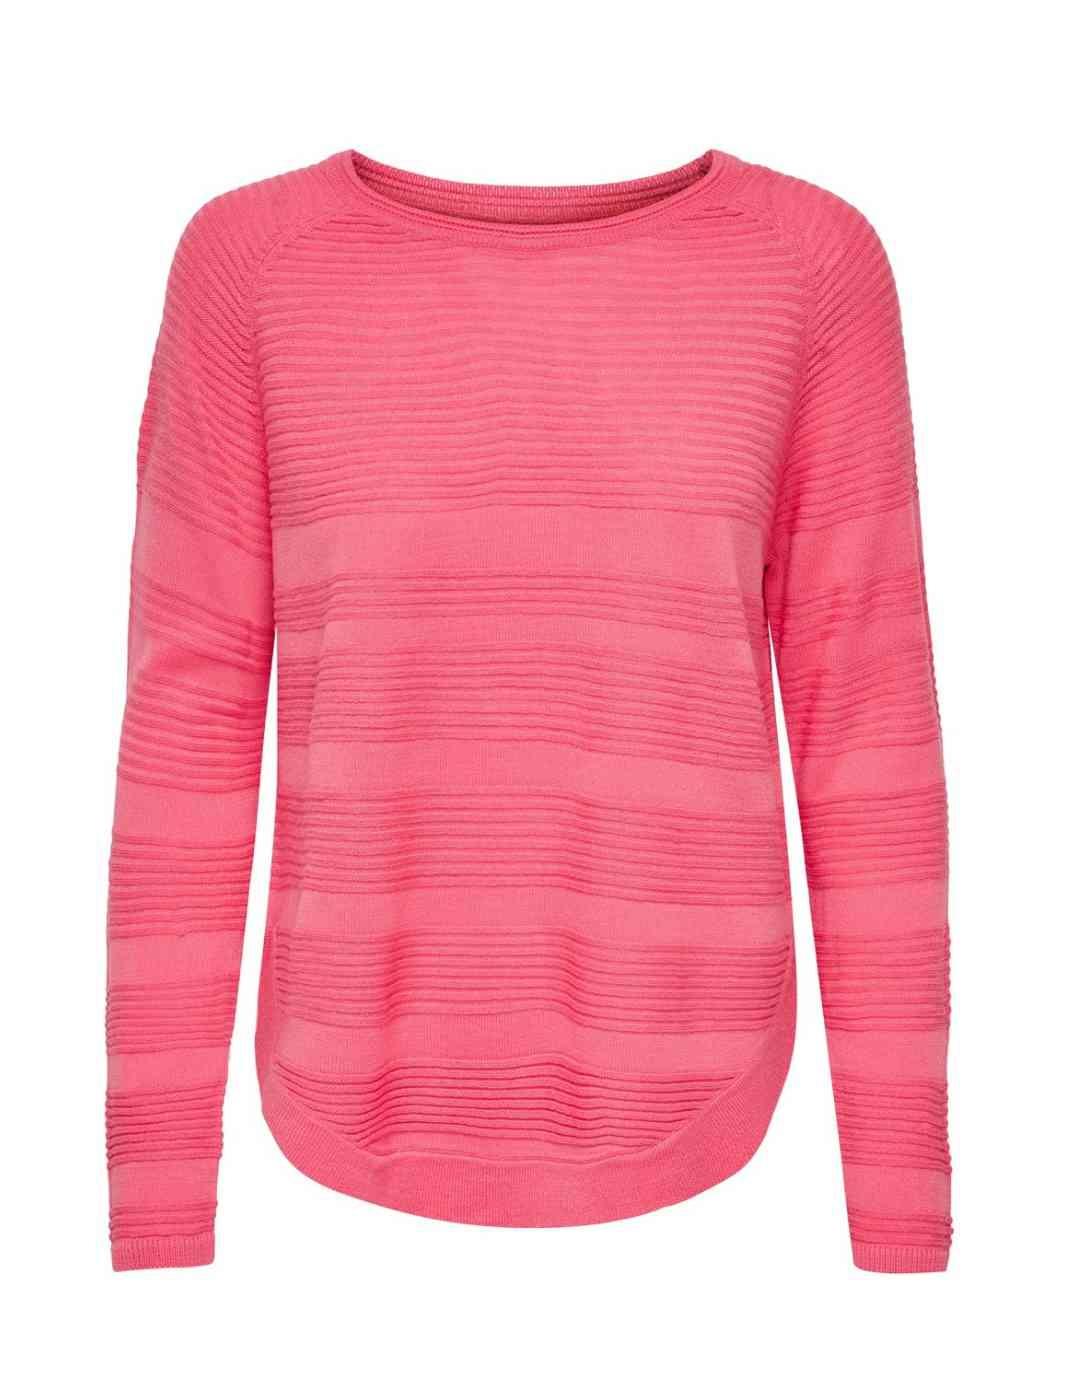 Jersey Only Caviar en coral para mujer-c